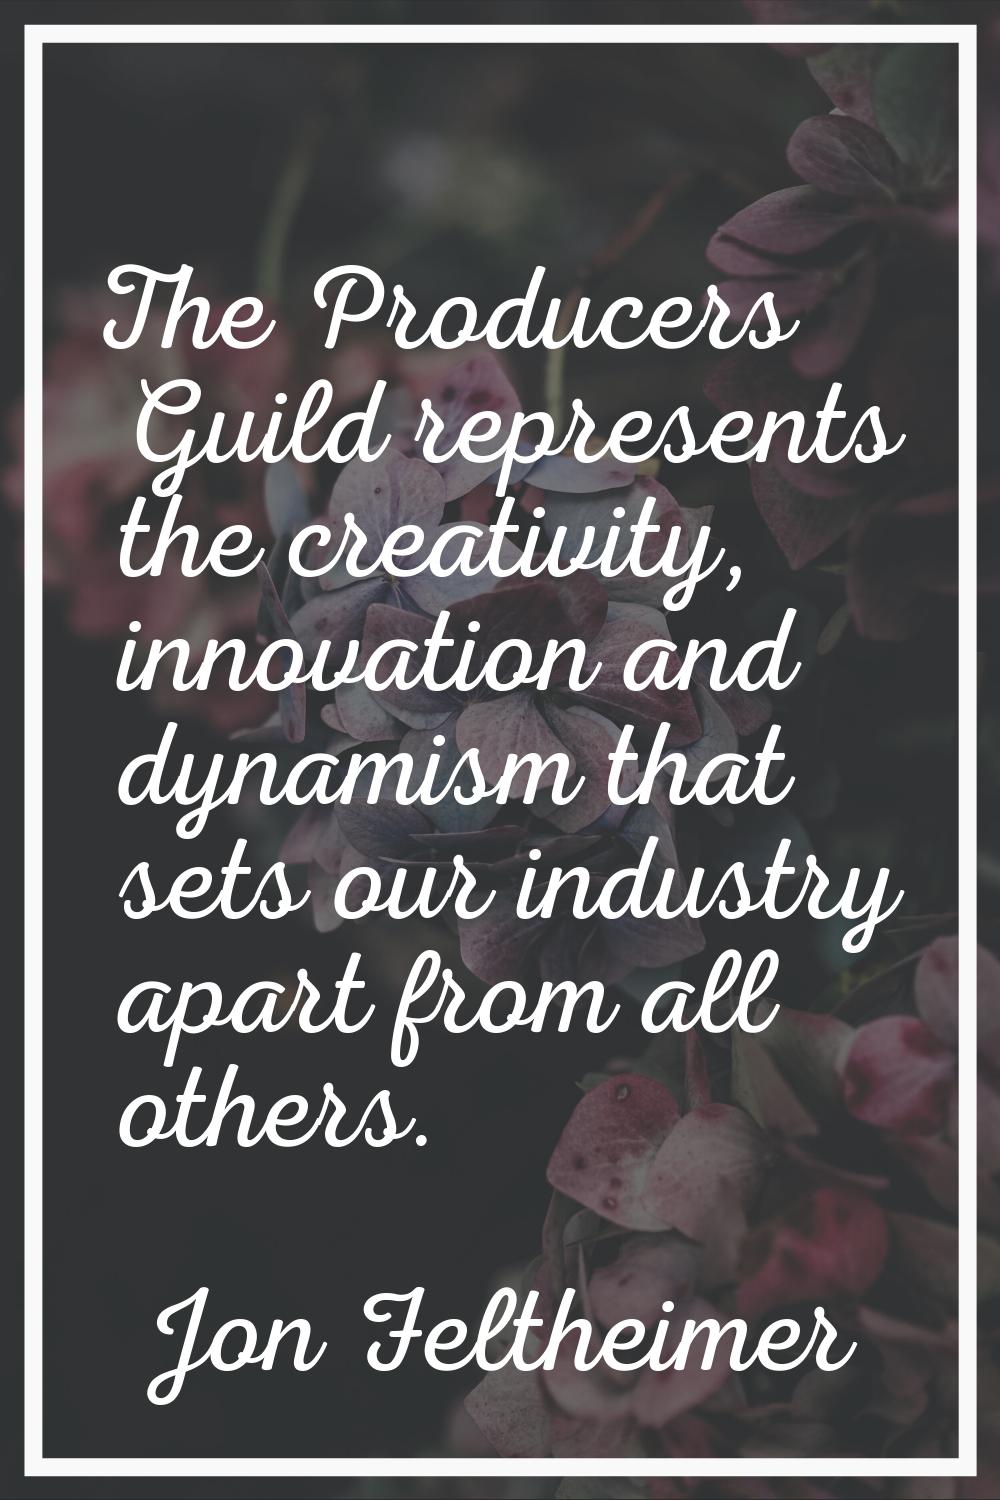 The Producers Guild represents the creativity, innovation and dynamism that sets our industry apart